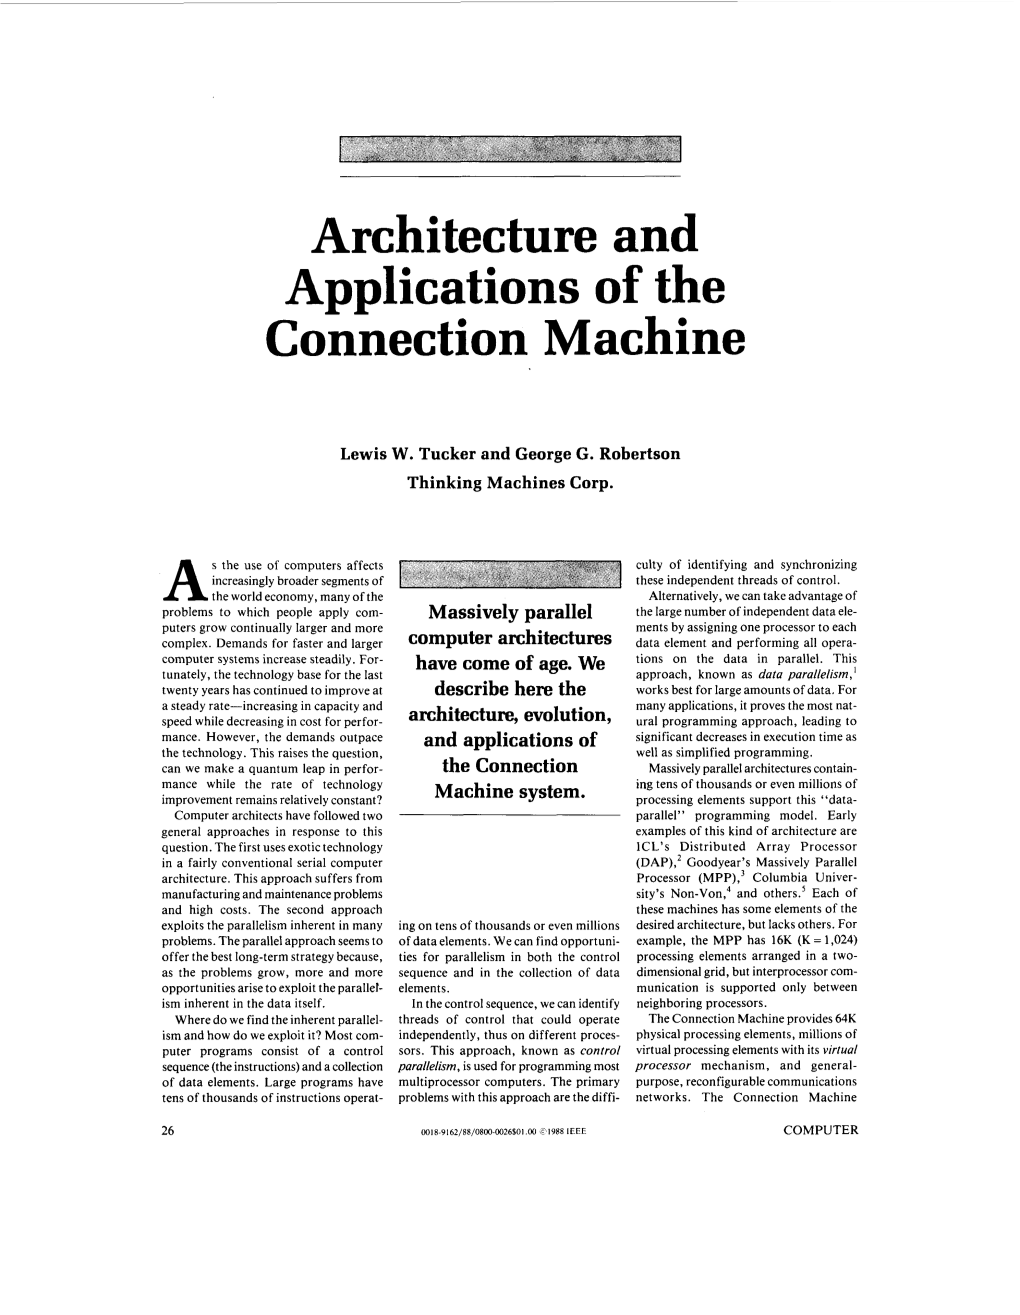 Architecture and Applications of the Connection Machine